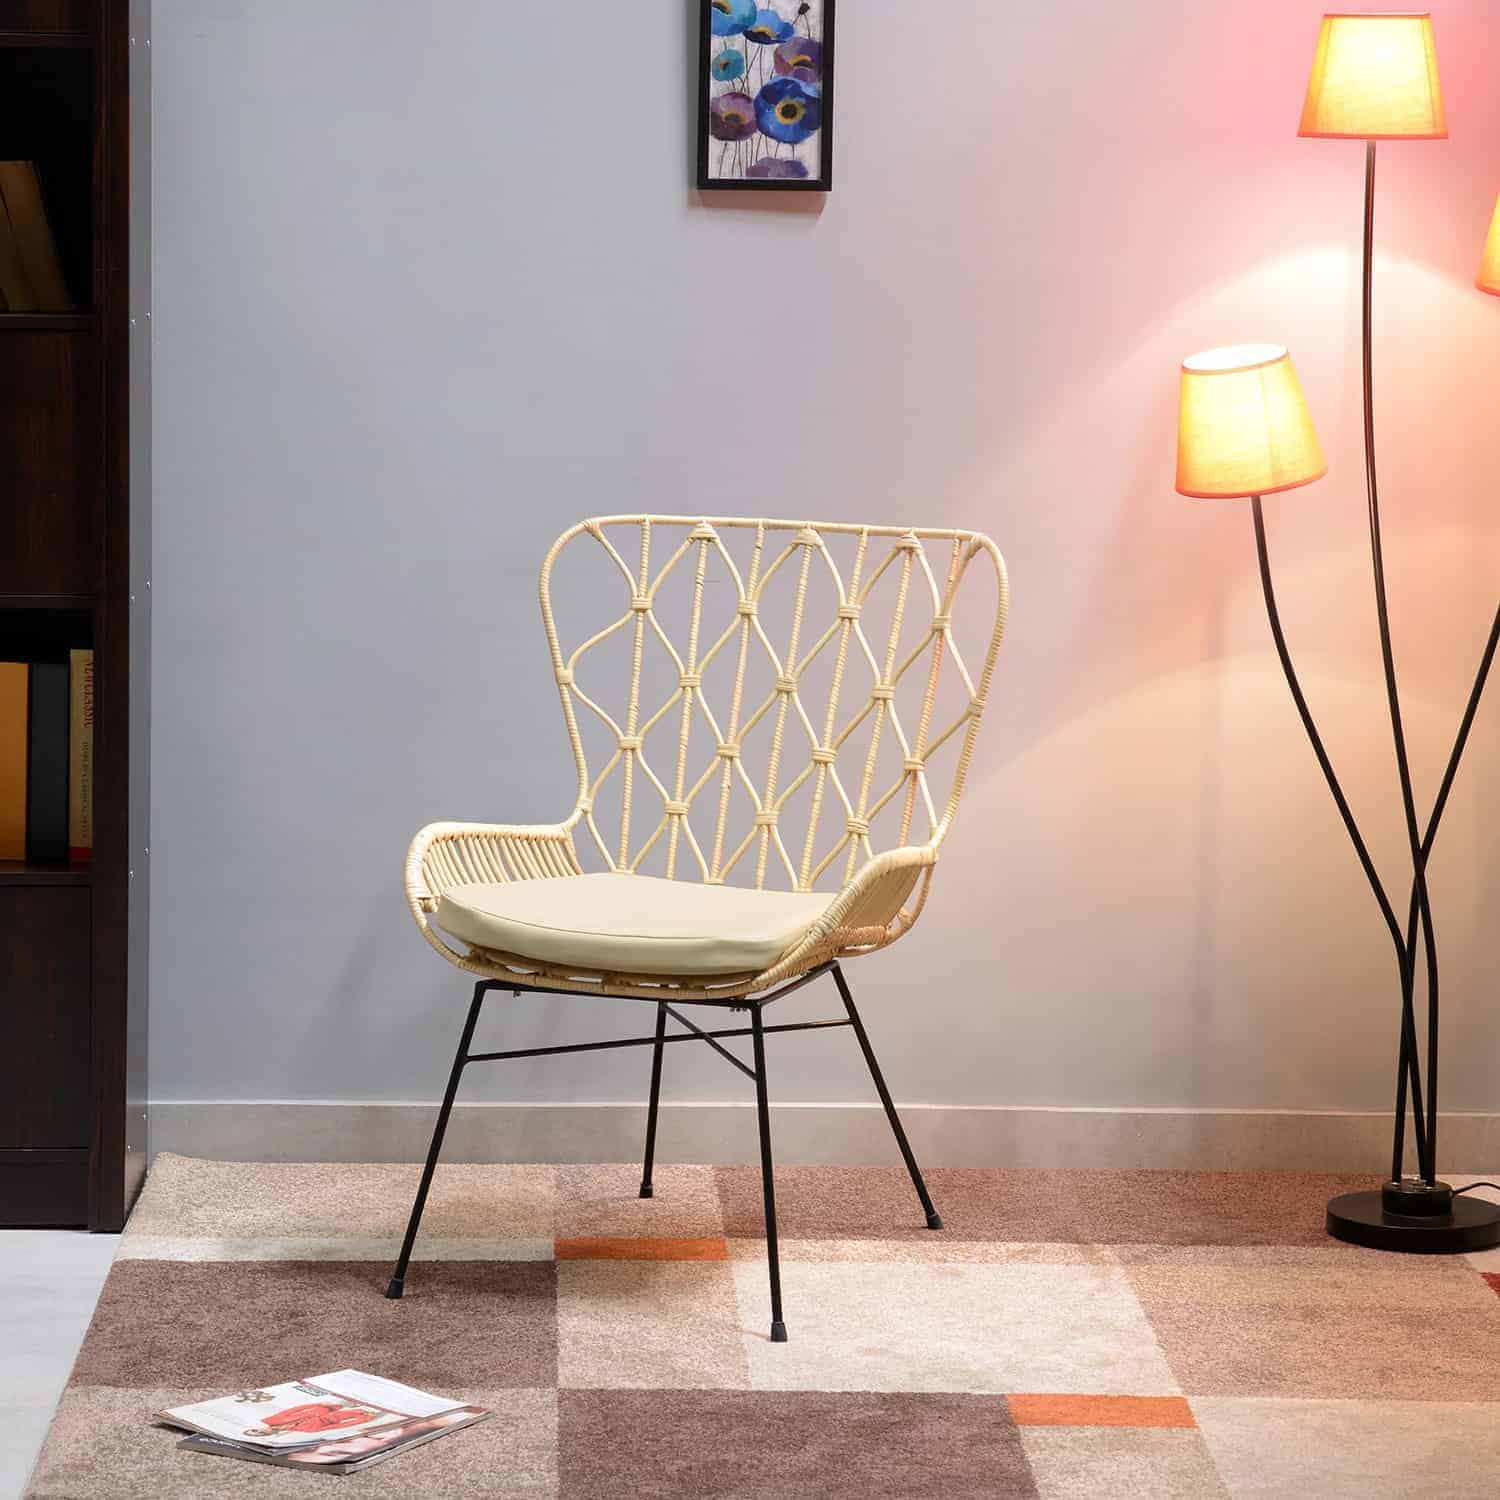 Beautiful white rattan chair placed in a home setting over a multicolored rug complementing a black metal lamp